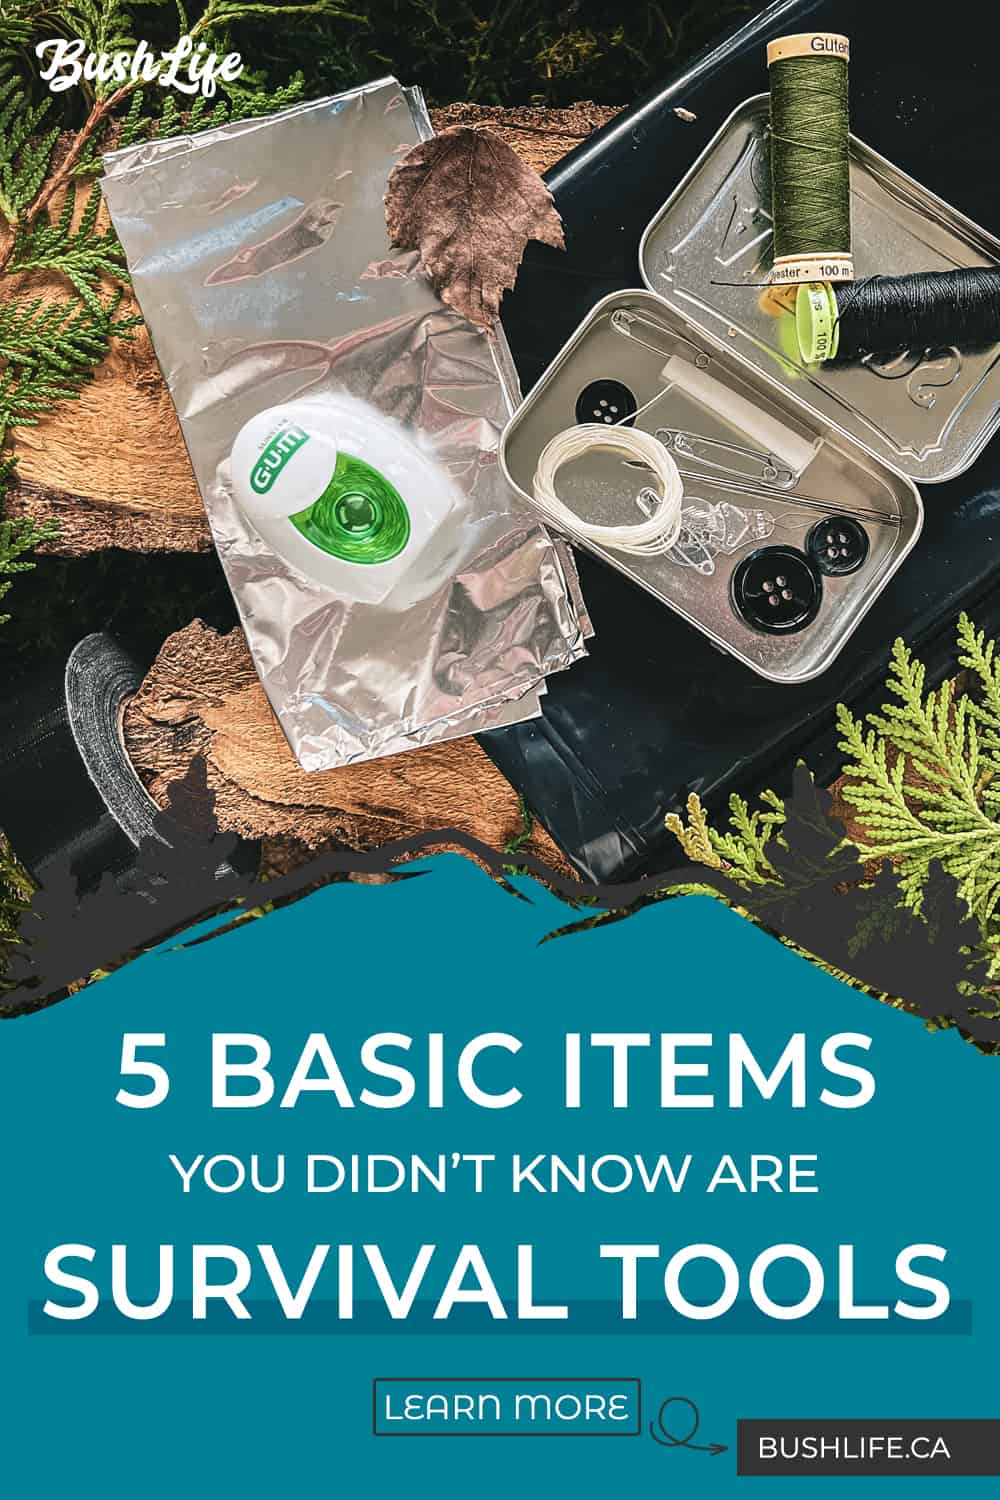 5 Basic Items You Didn't Know Are Useful Survival Tools